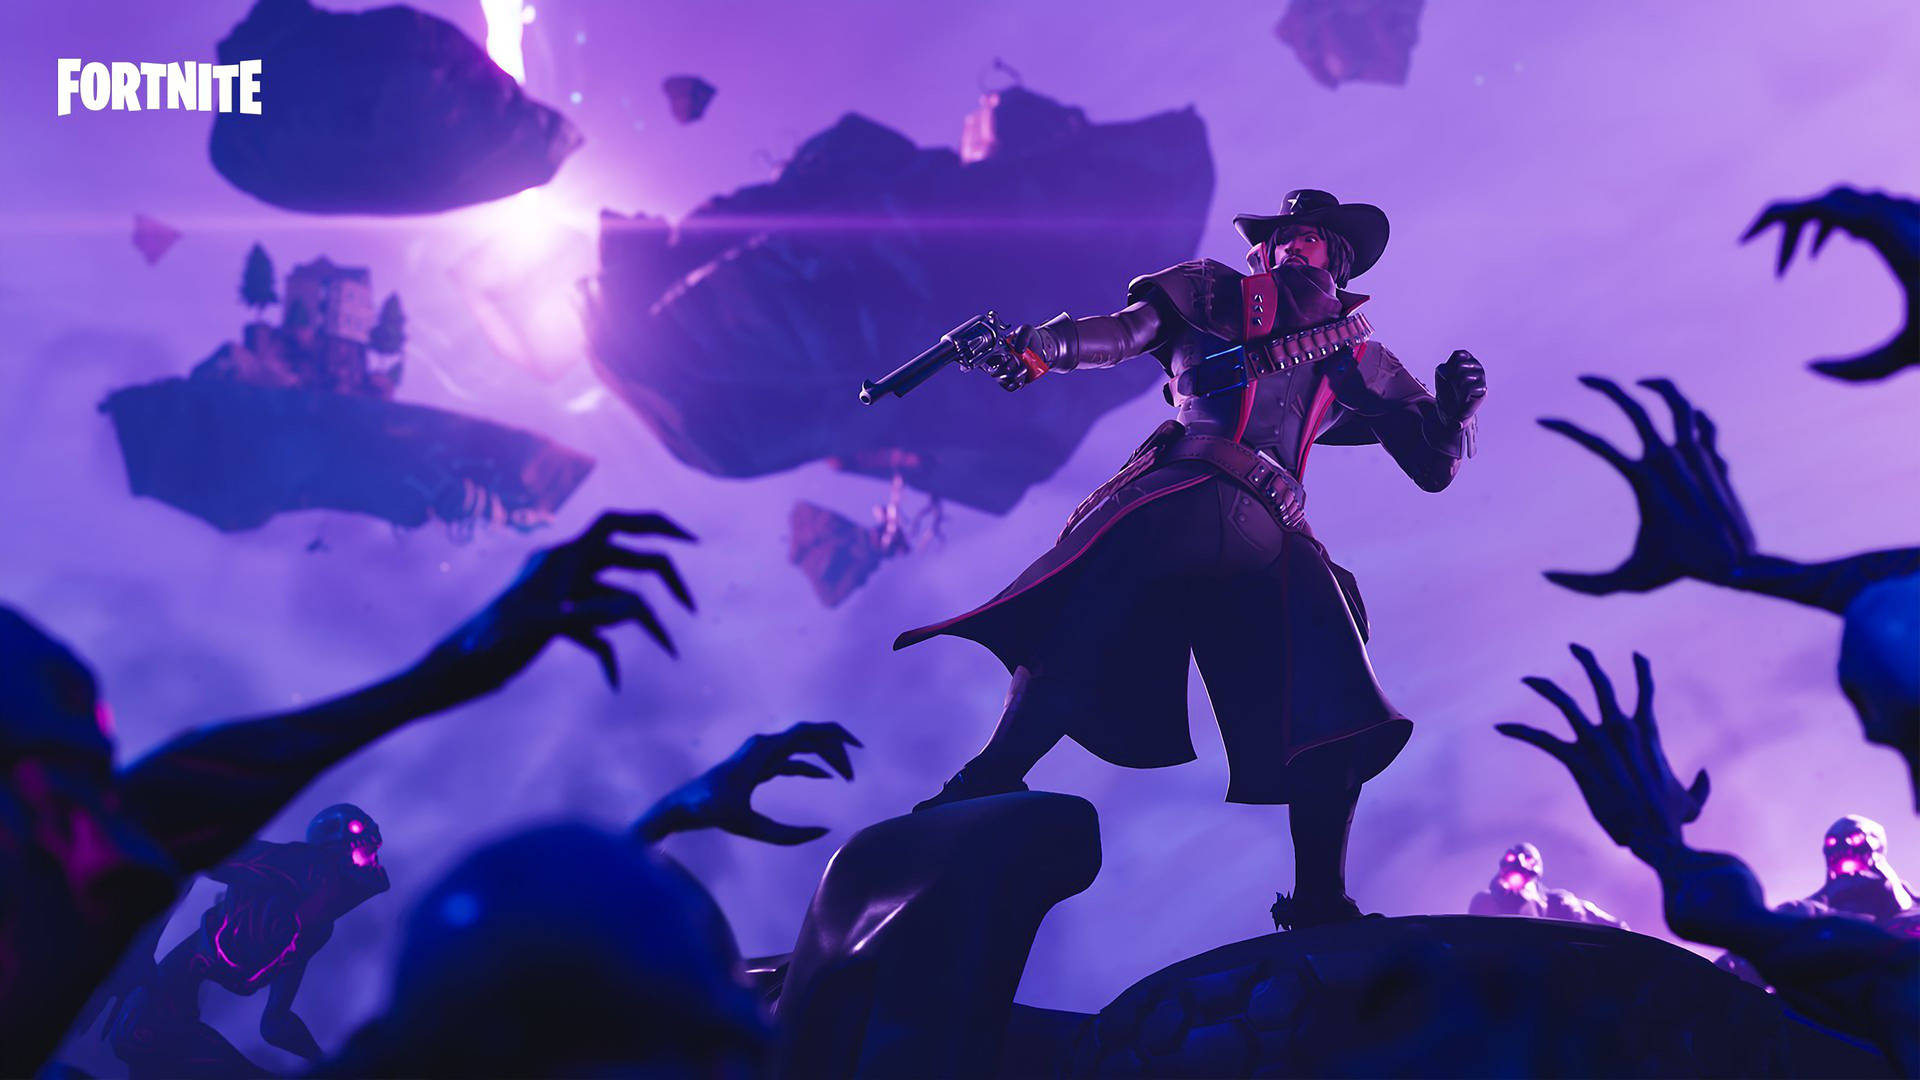 Fortnite - A Zombie In The Sky Wallpaper